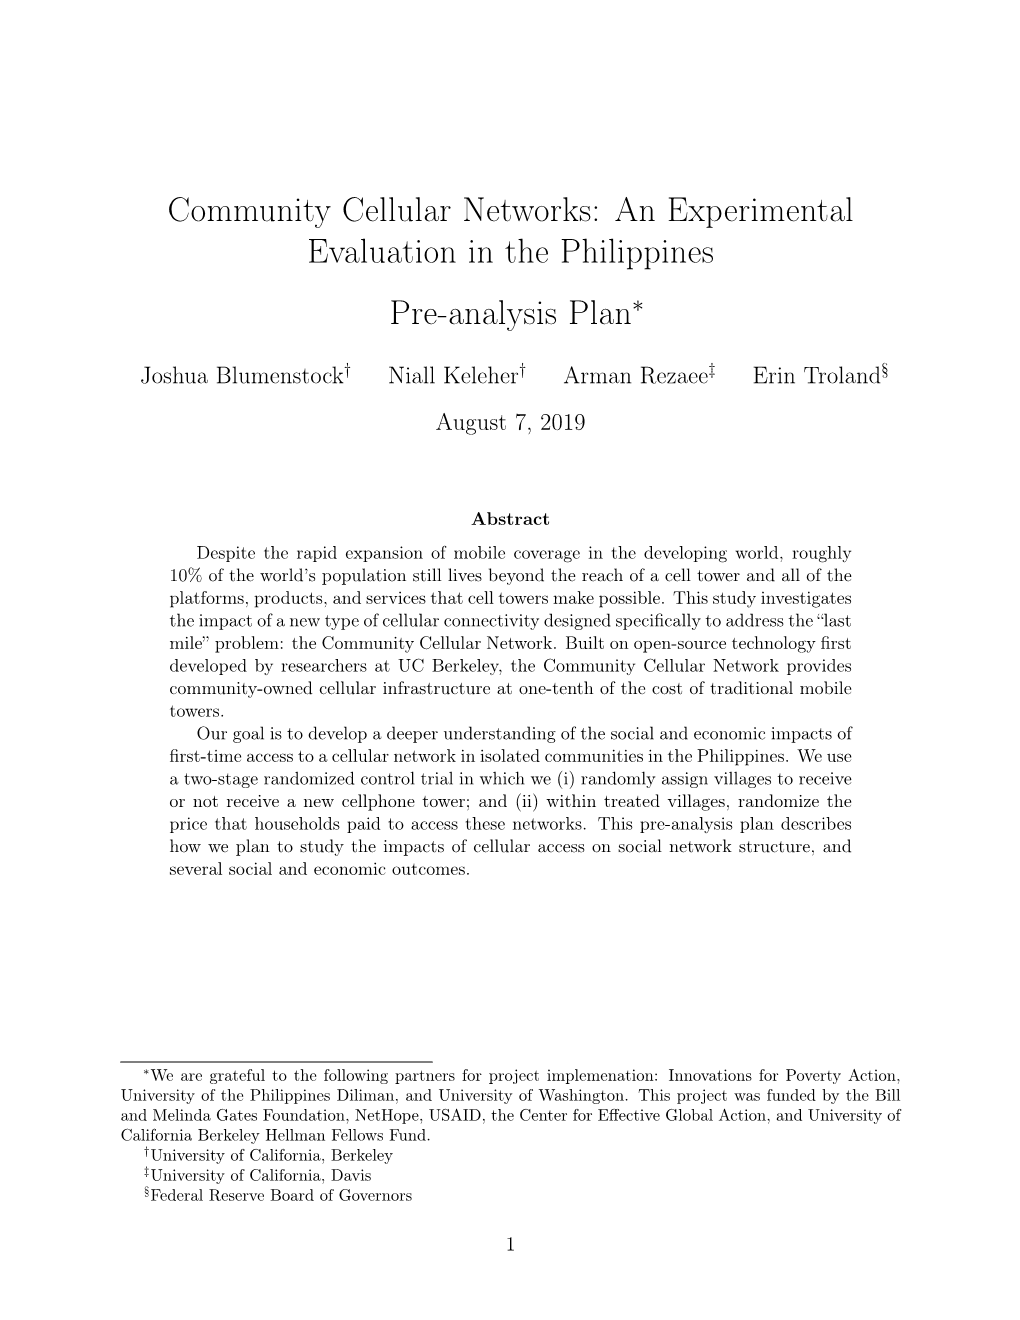 Community Cellular Networks: an Experimental Evaluation in the Philippines Pre-Analysis Plan∗